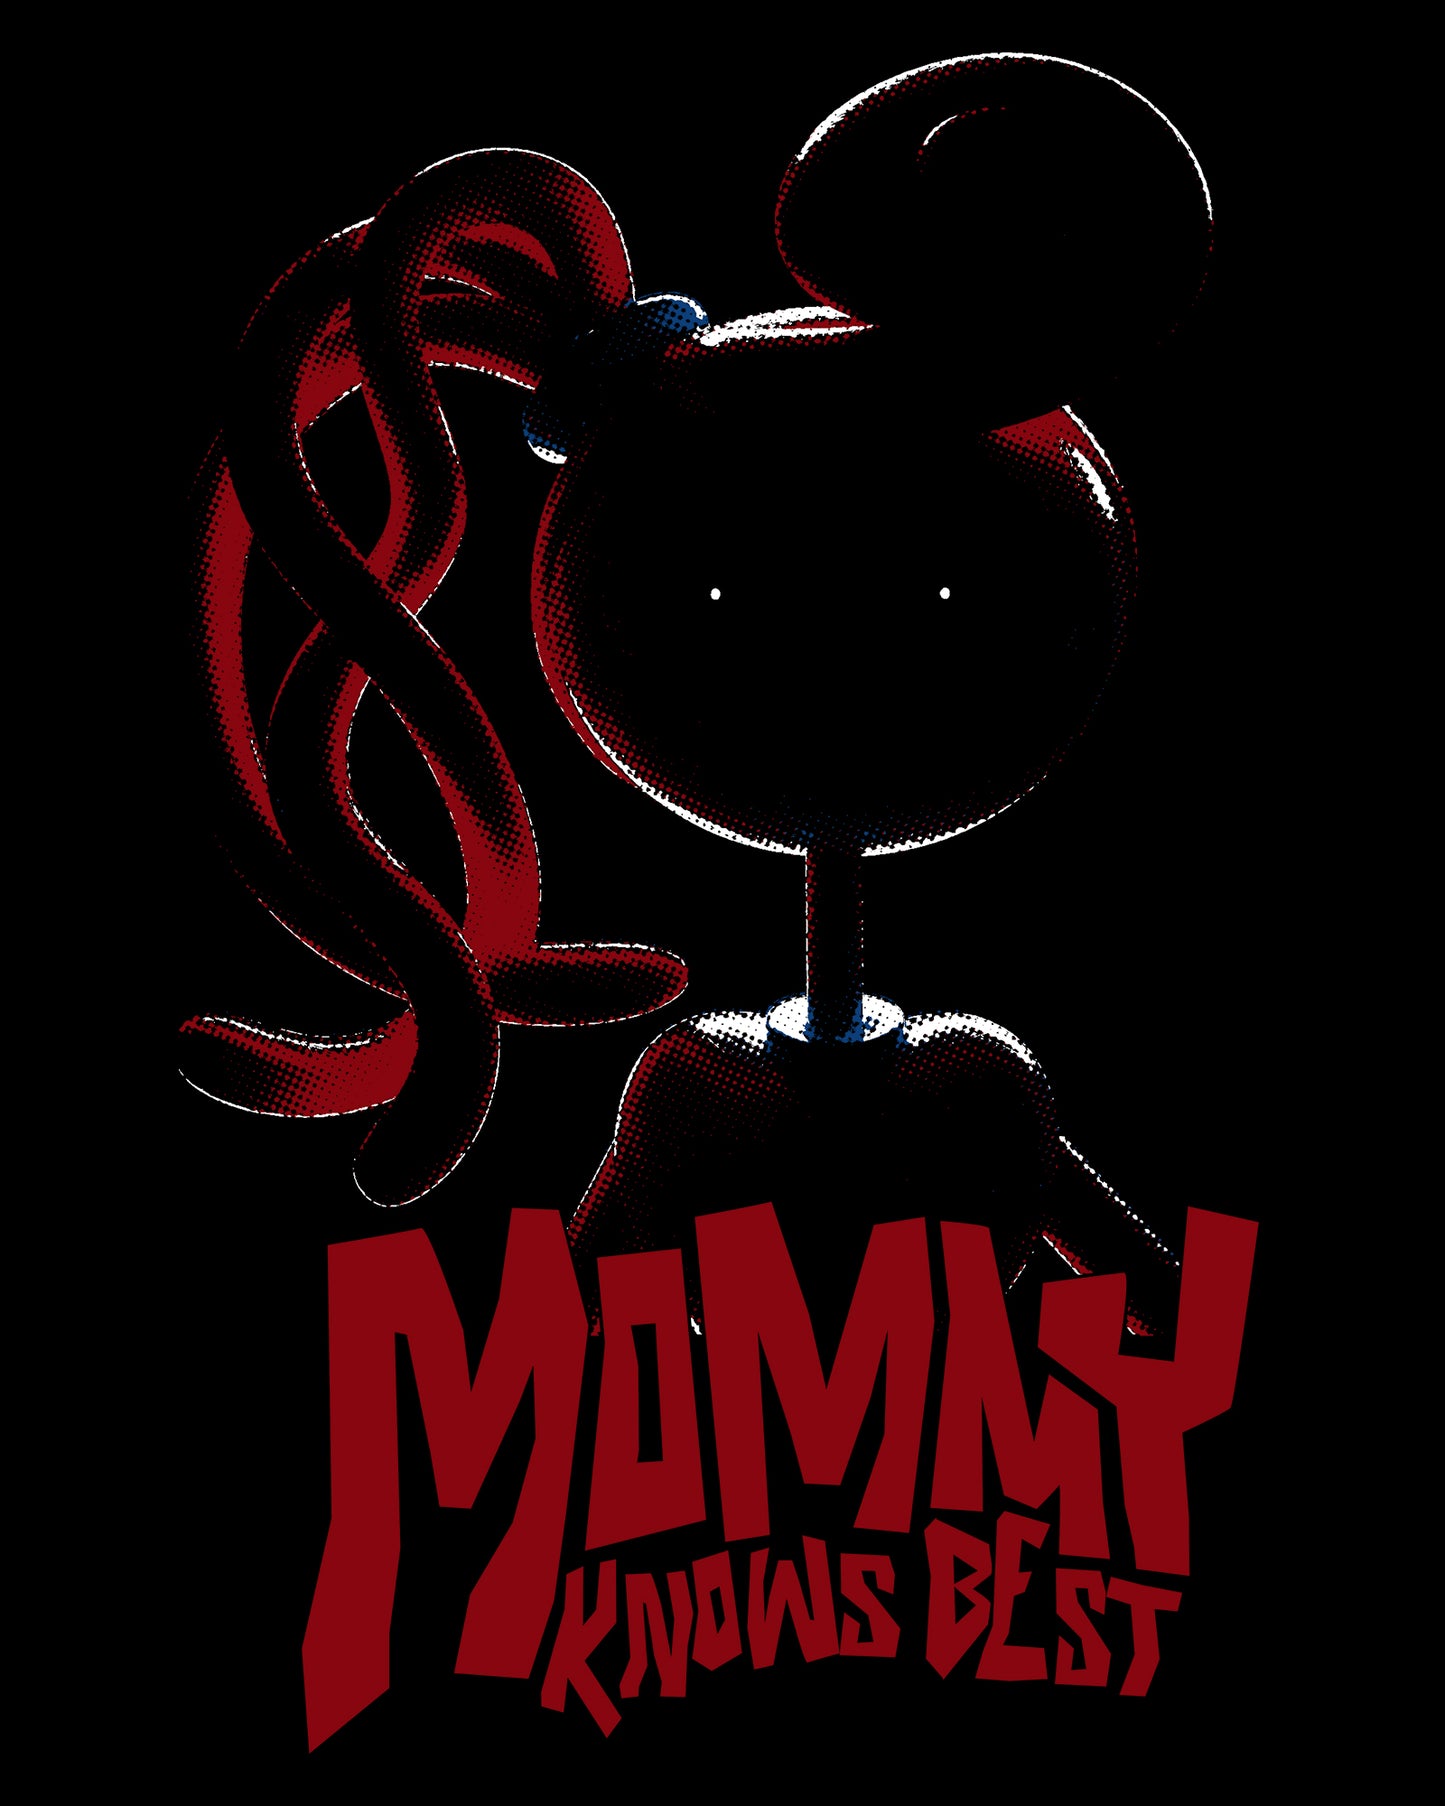 image on shirt: mommy long legs darkened, except for eyes. text: mommy knows best